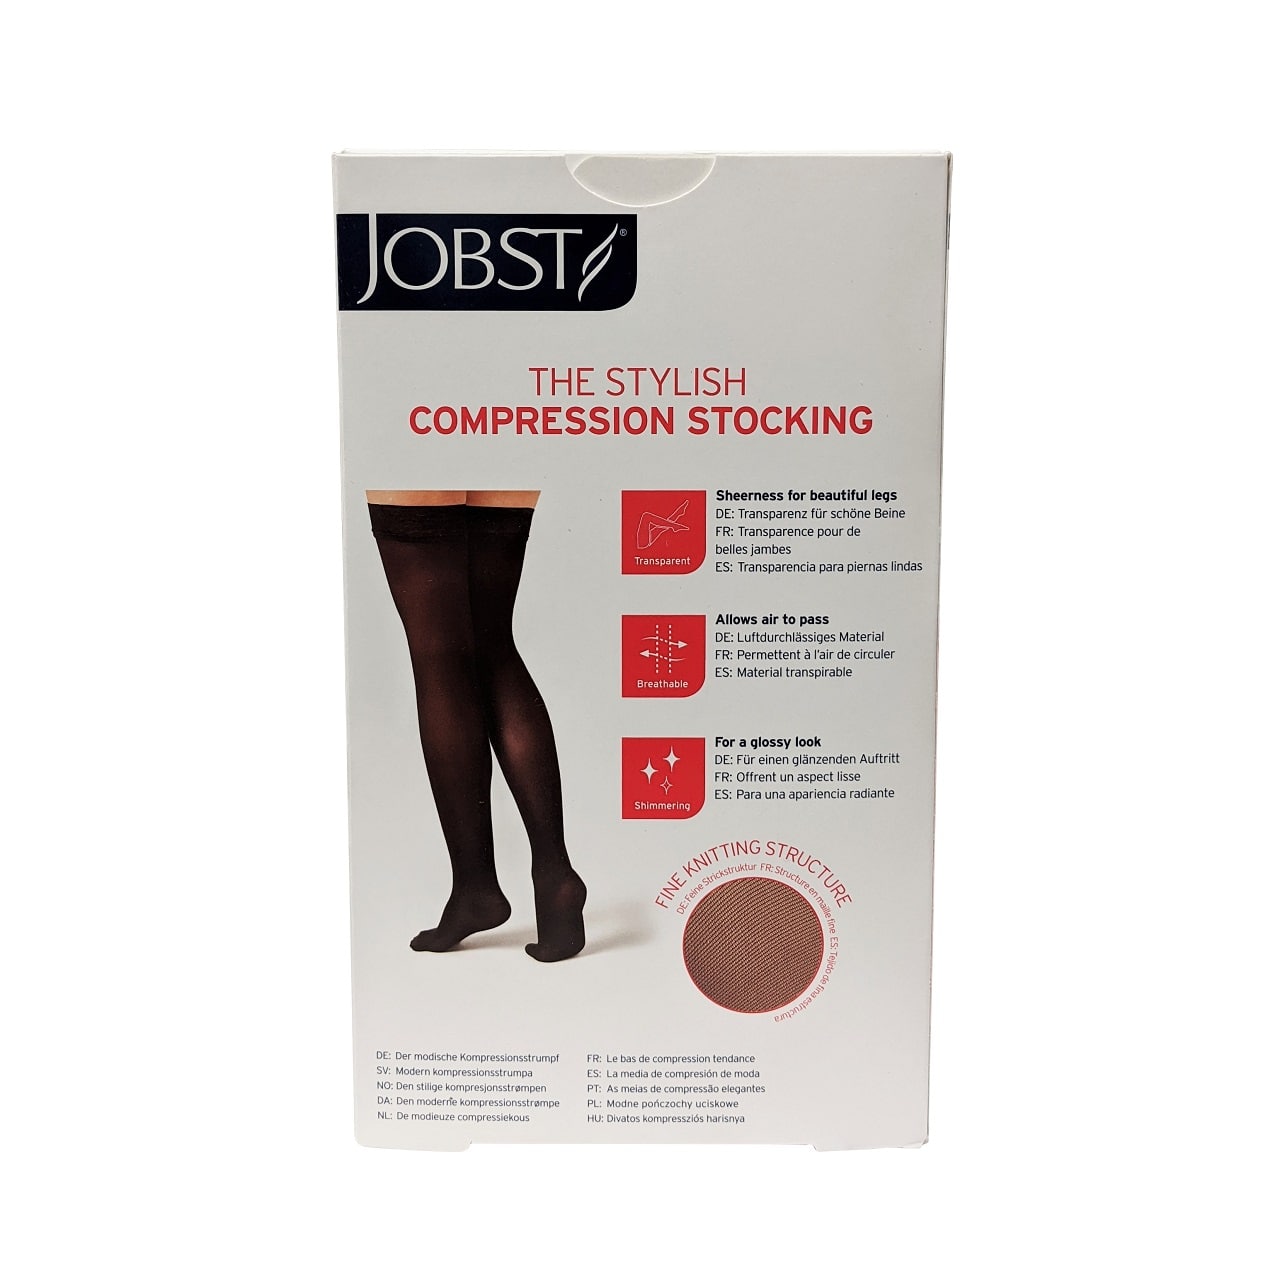 Features of Jobst UltraSheer Compression Stockings 20-30 mmHg - Knee High / Open Toe / Natural (Medium)